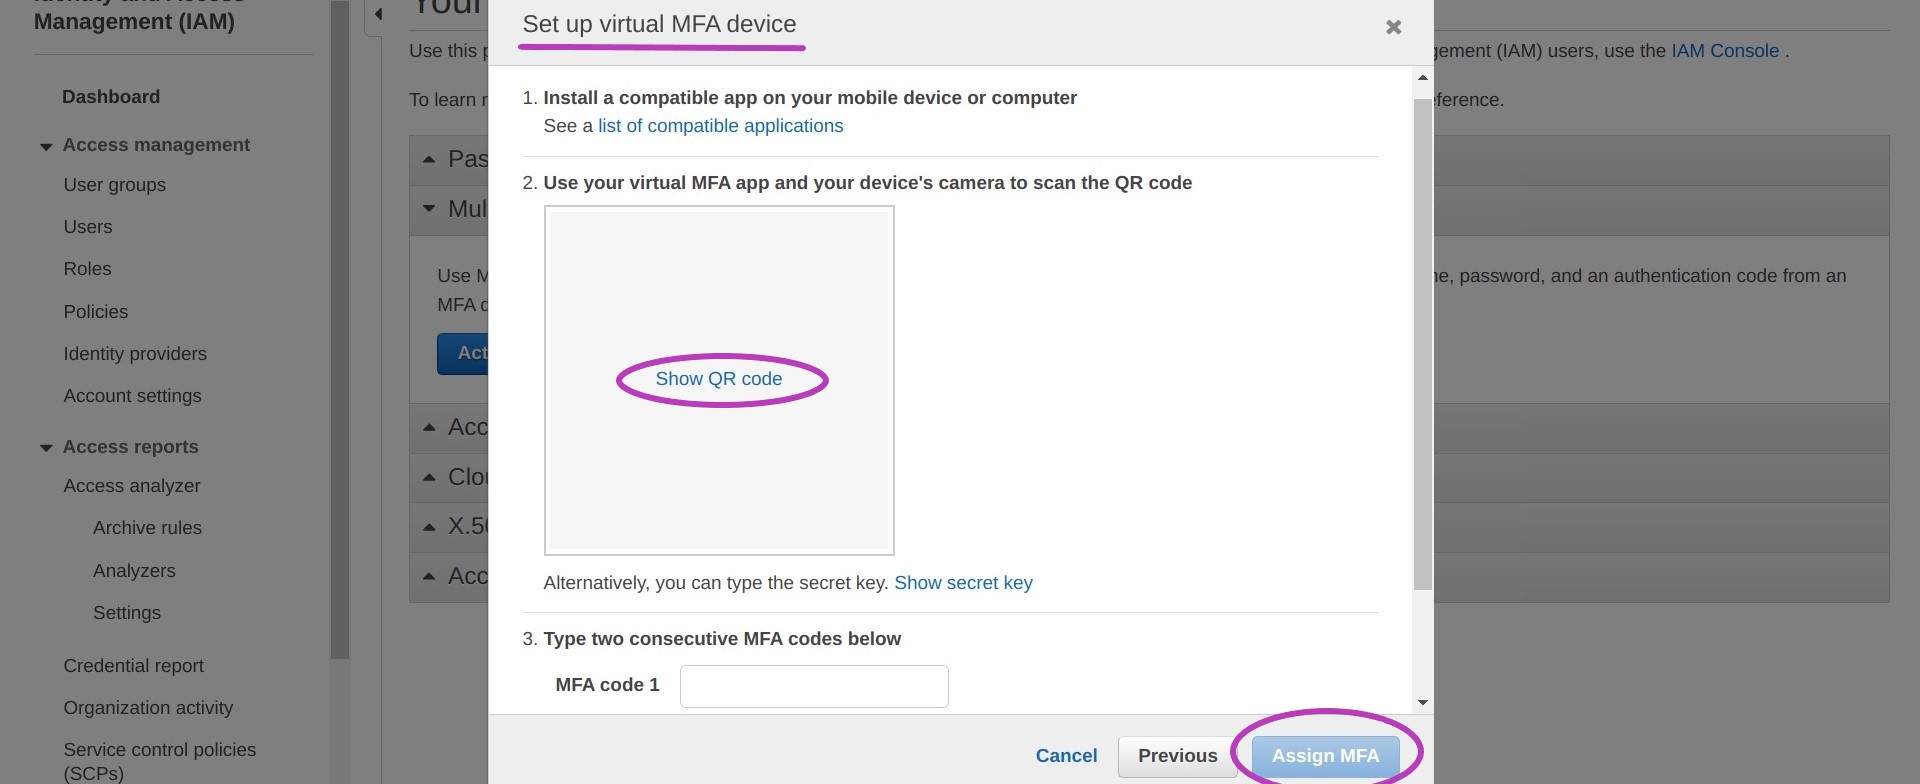 Screen shot of AWS Console 'Set up a virtual MFA device' pop-up window in a browser with the option "Show QR code" selected